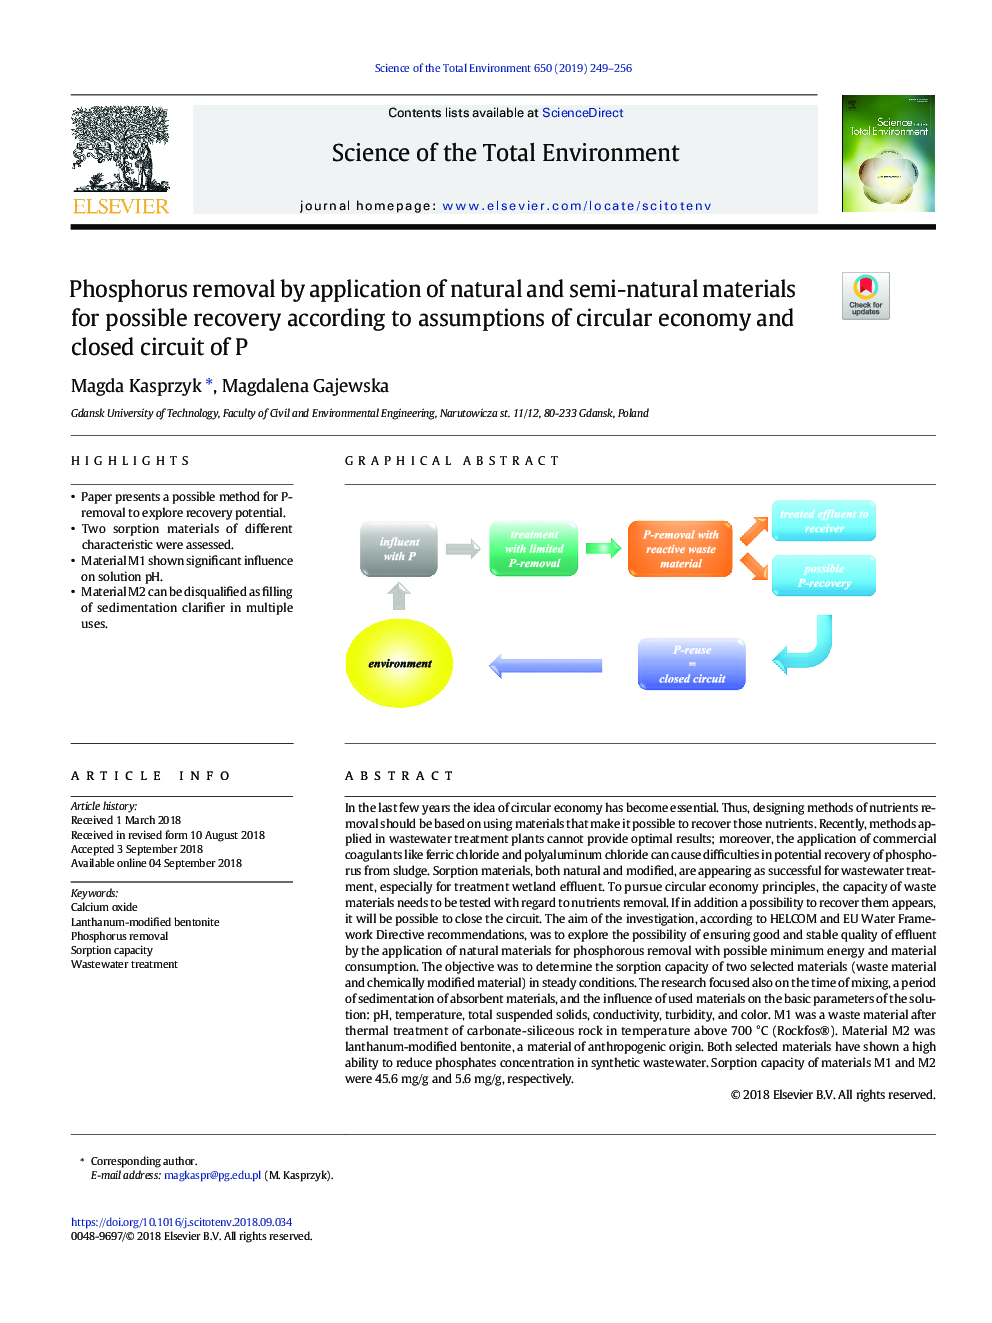 Phosphorus removal by application of natural and semi-natural materials for possible recovery according to assumptions of circular economy and closed circuit of P